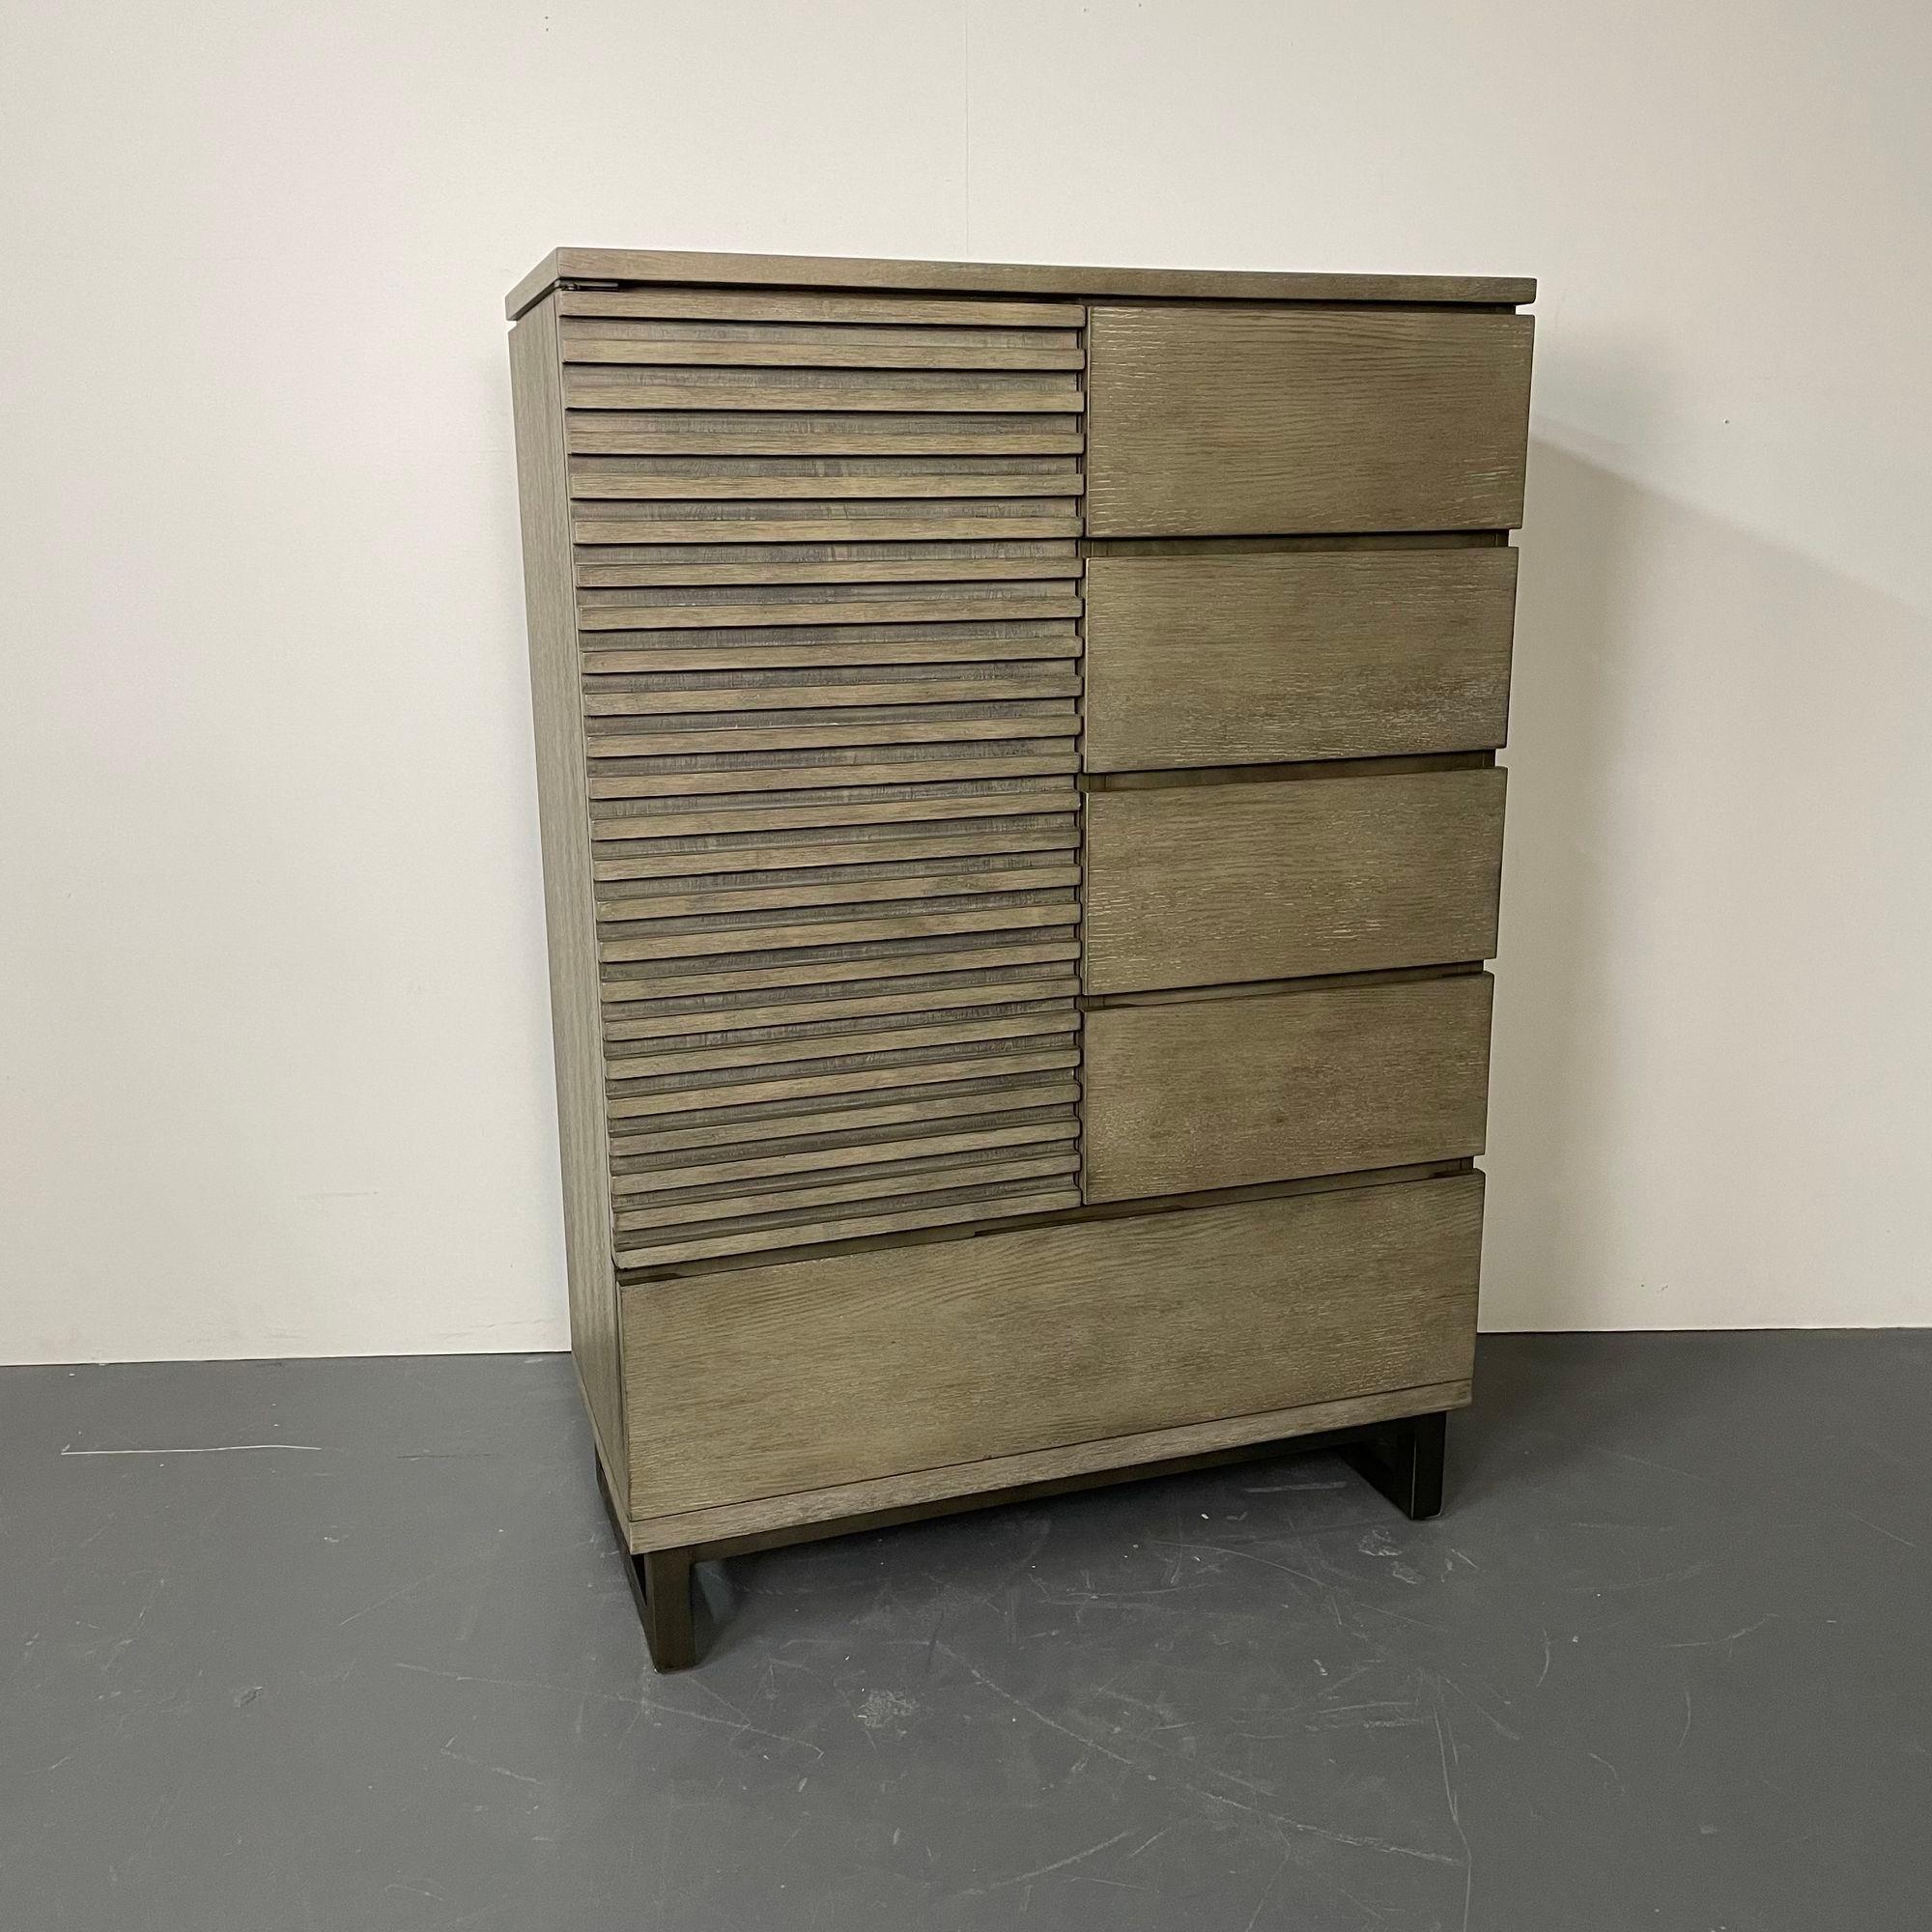 Pickled Modern Hi Chest, Armoire Cabinet, Wardrobe, Metal Base
A stylish cabinet or wardrobe in a tactile brie finish with grey tones and organic natural materials feel. Constructed from poplar and hardwood solids, with oak veneers, The case having